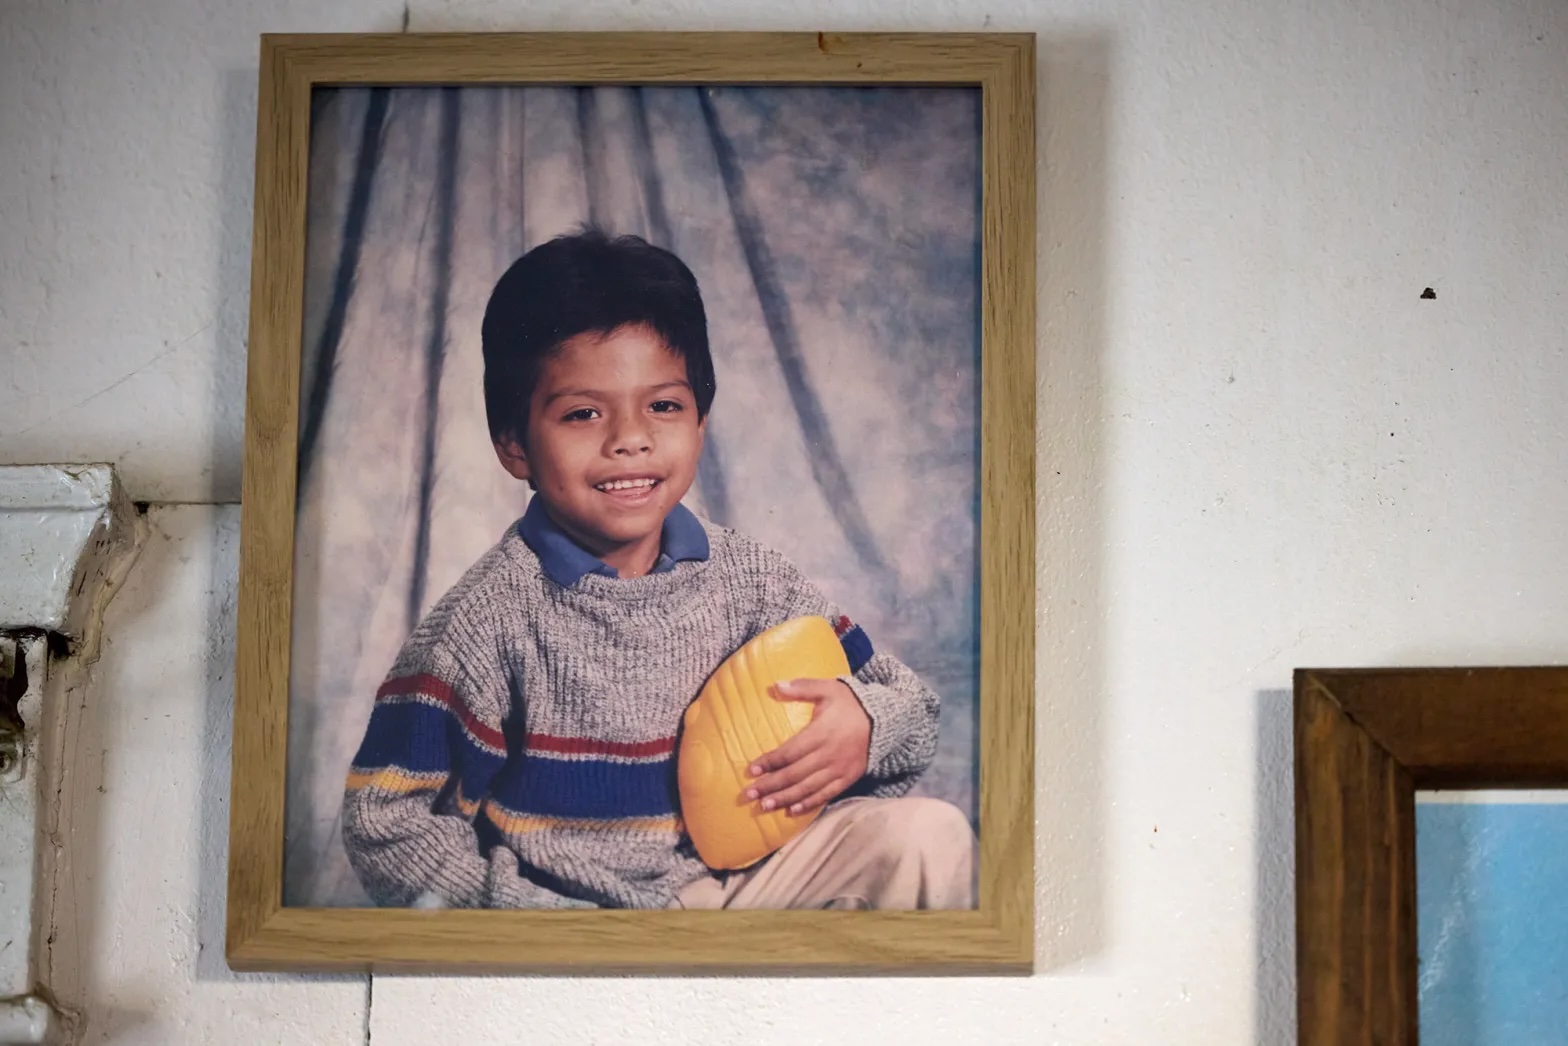 A photo of a Latino child in a picture frame.